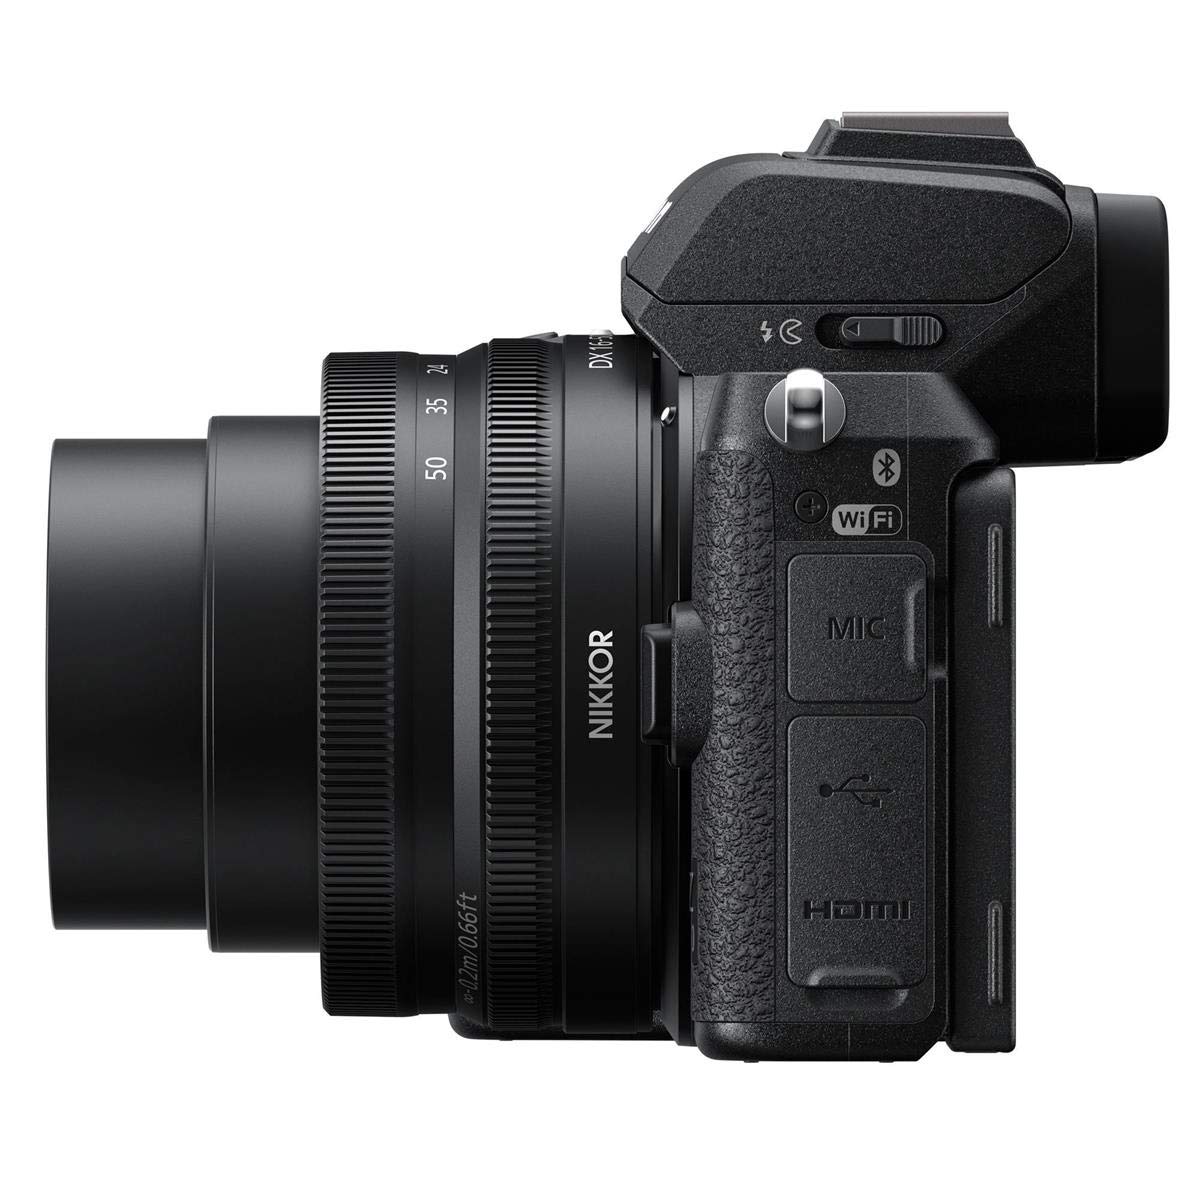 Nikon Z 50 DX-Format Mirrorless Camera with 16-50mm f/3.5-6.3 VR Lens, Bundle with FTZ II Mount Adapter and Accessories